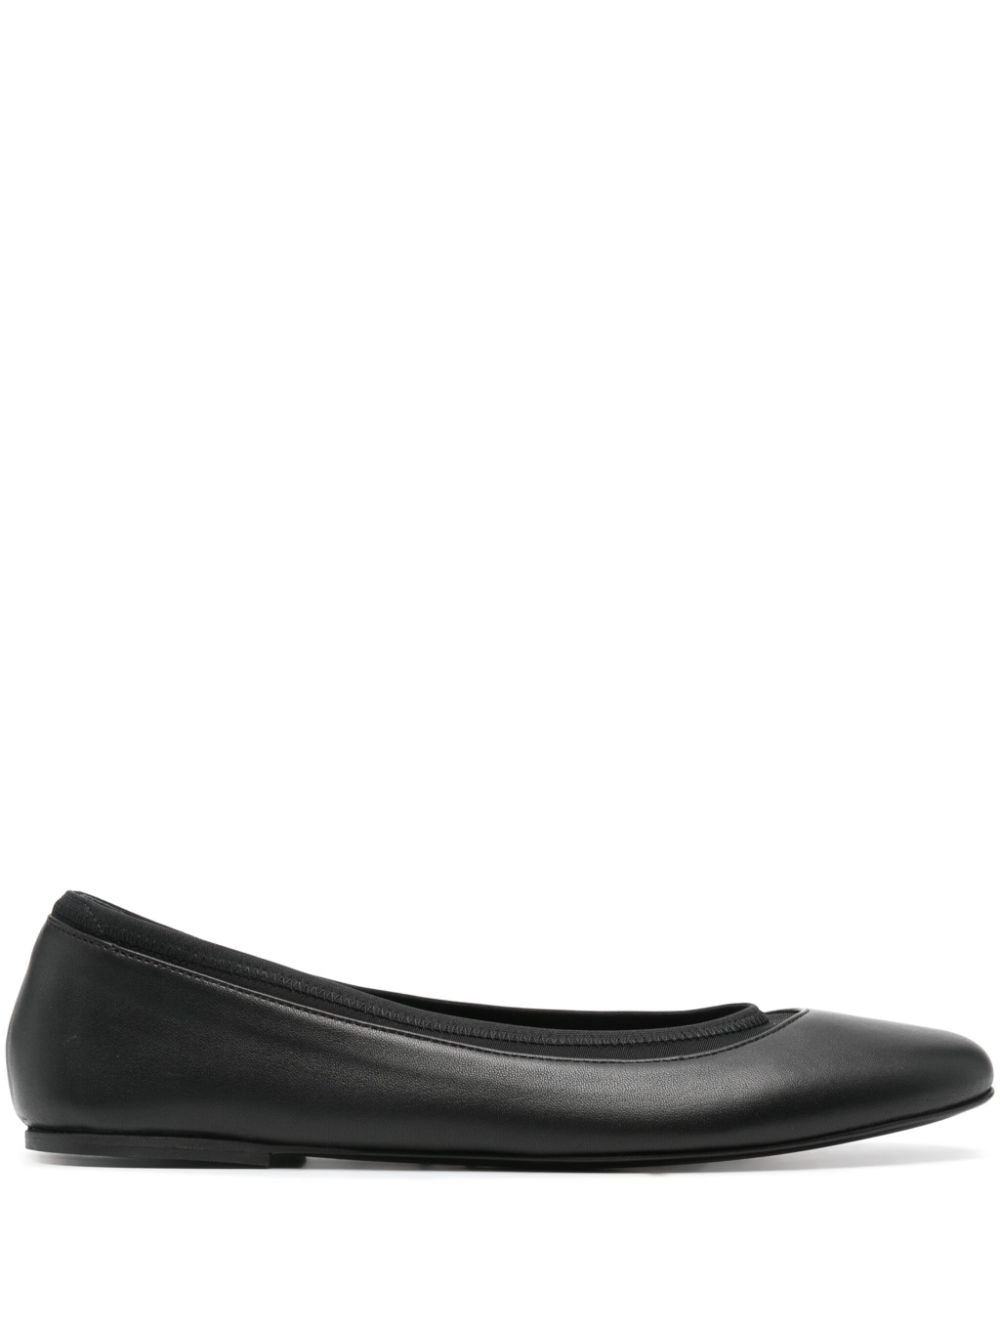 Rupa leather ballerina shoes